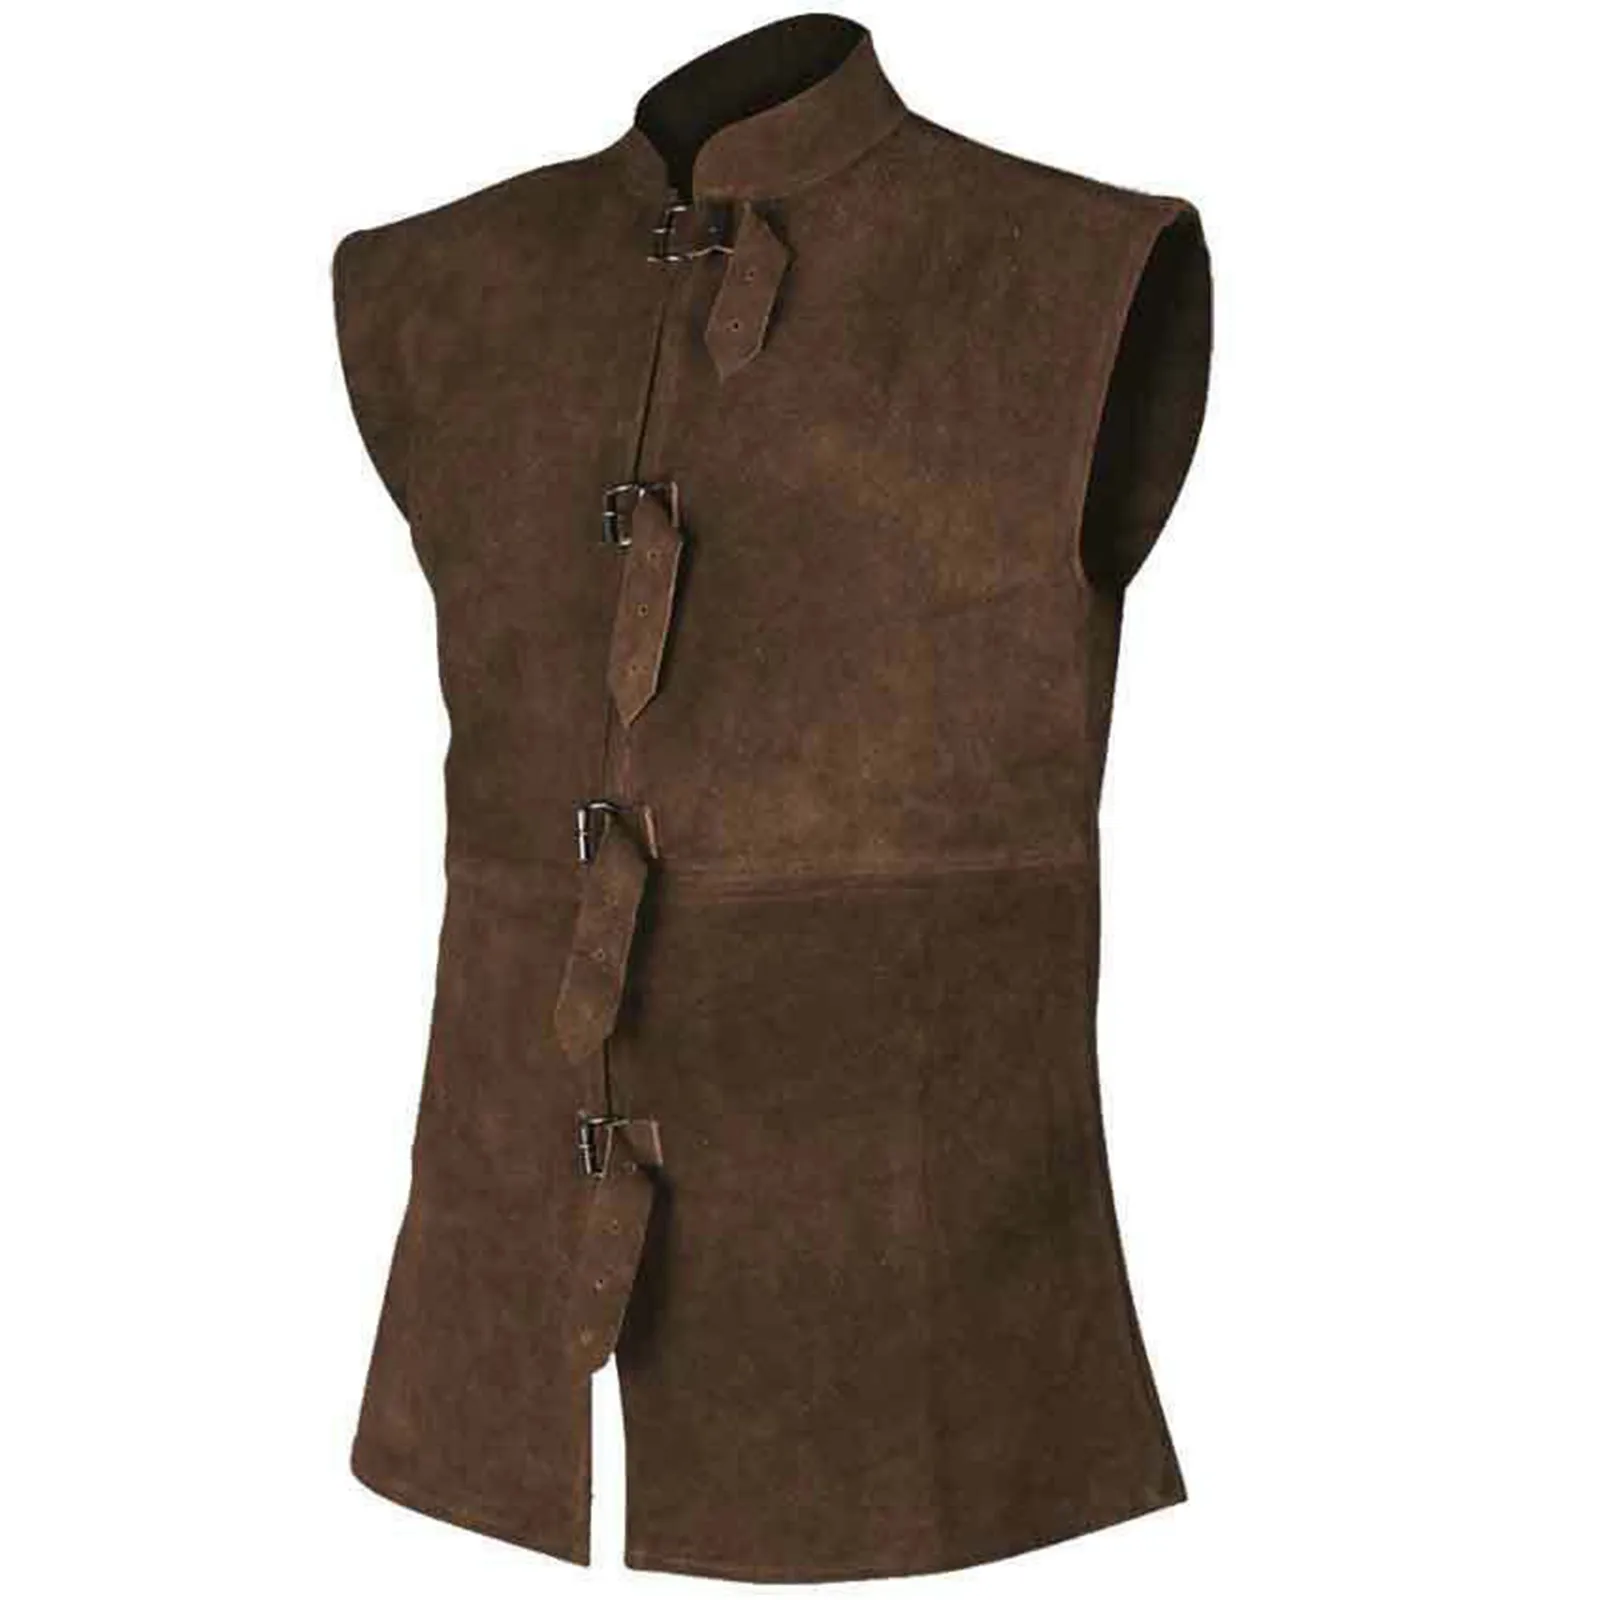 Vintage Suede Waistcoat Men Sleeveless Solid Color Stand-Up Collar Buttons Coat Vest Spring Autumn Medieval Retro Suit Vest Male 3417 summer vintage dress women sleeveless chinese style buttons stand collar a line short dress sexy retro cotton and linen